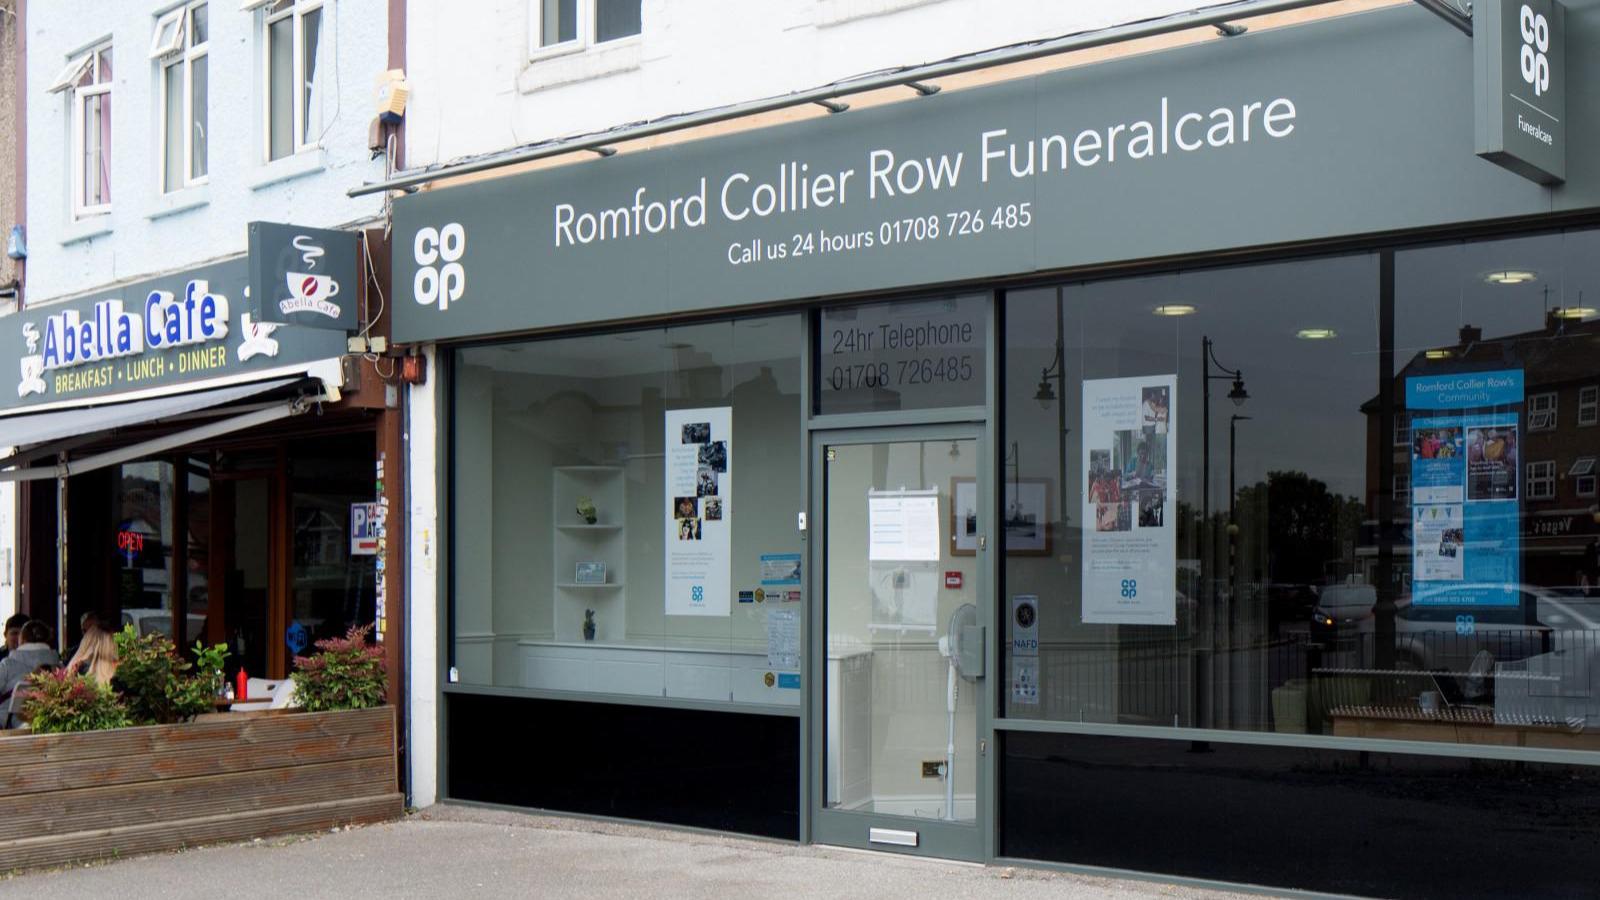 Images Co-op Funeralcare, Collier Row